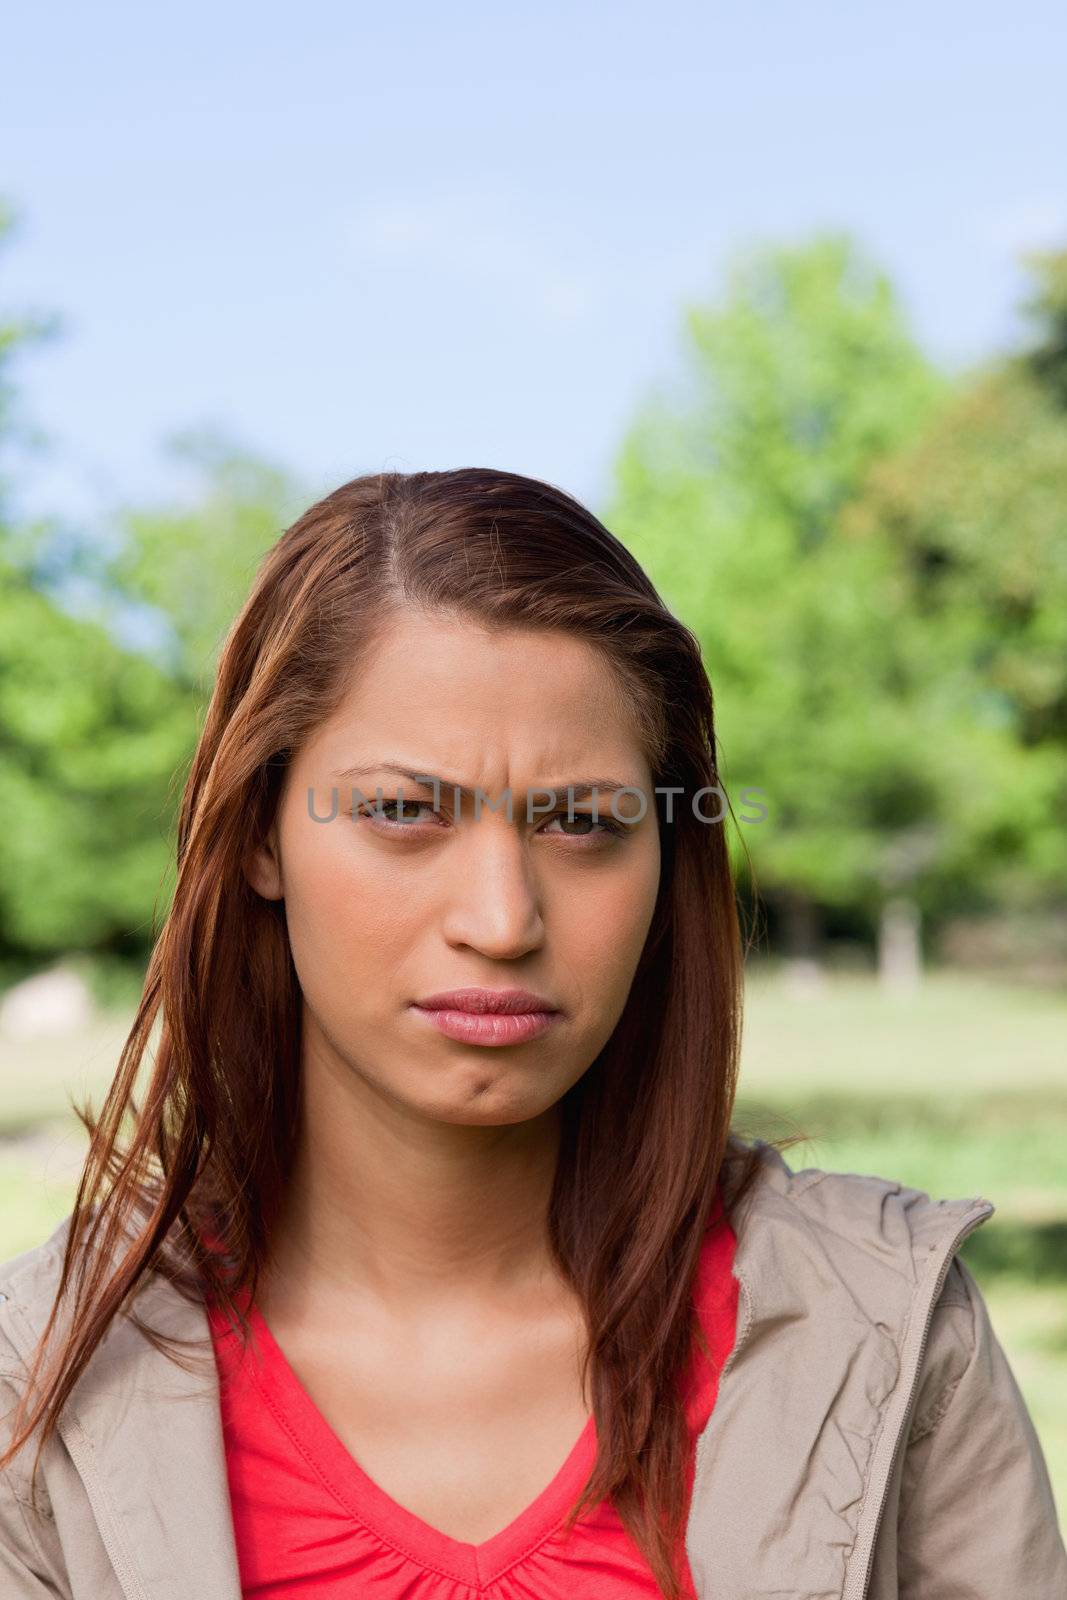 Woman looking directly in front of her with a stern expression on her face